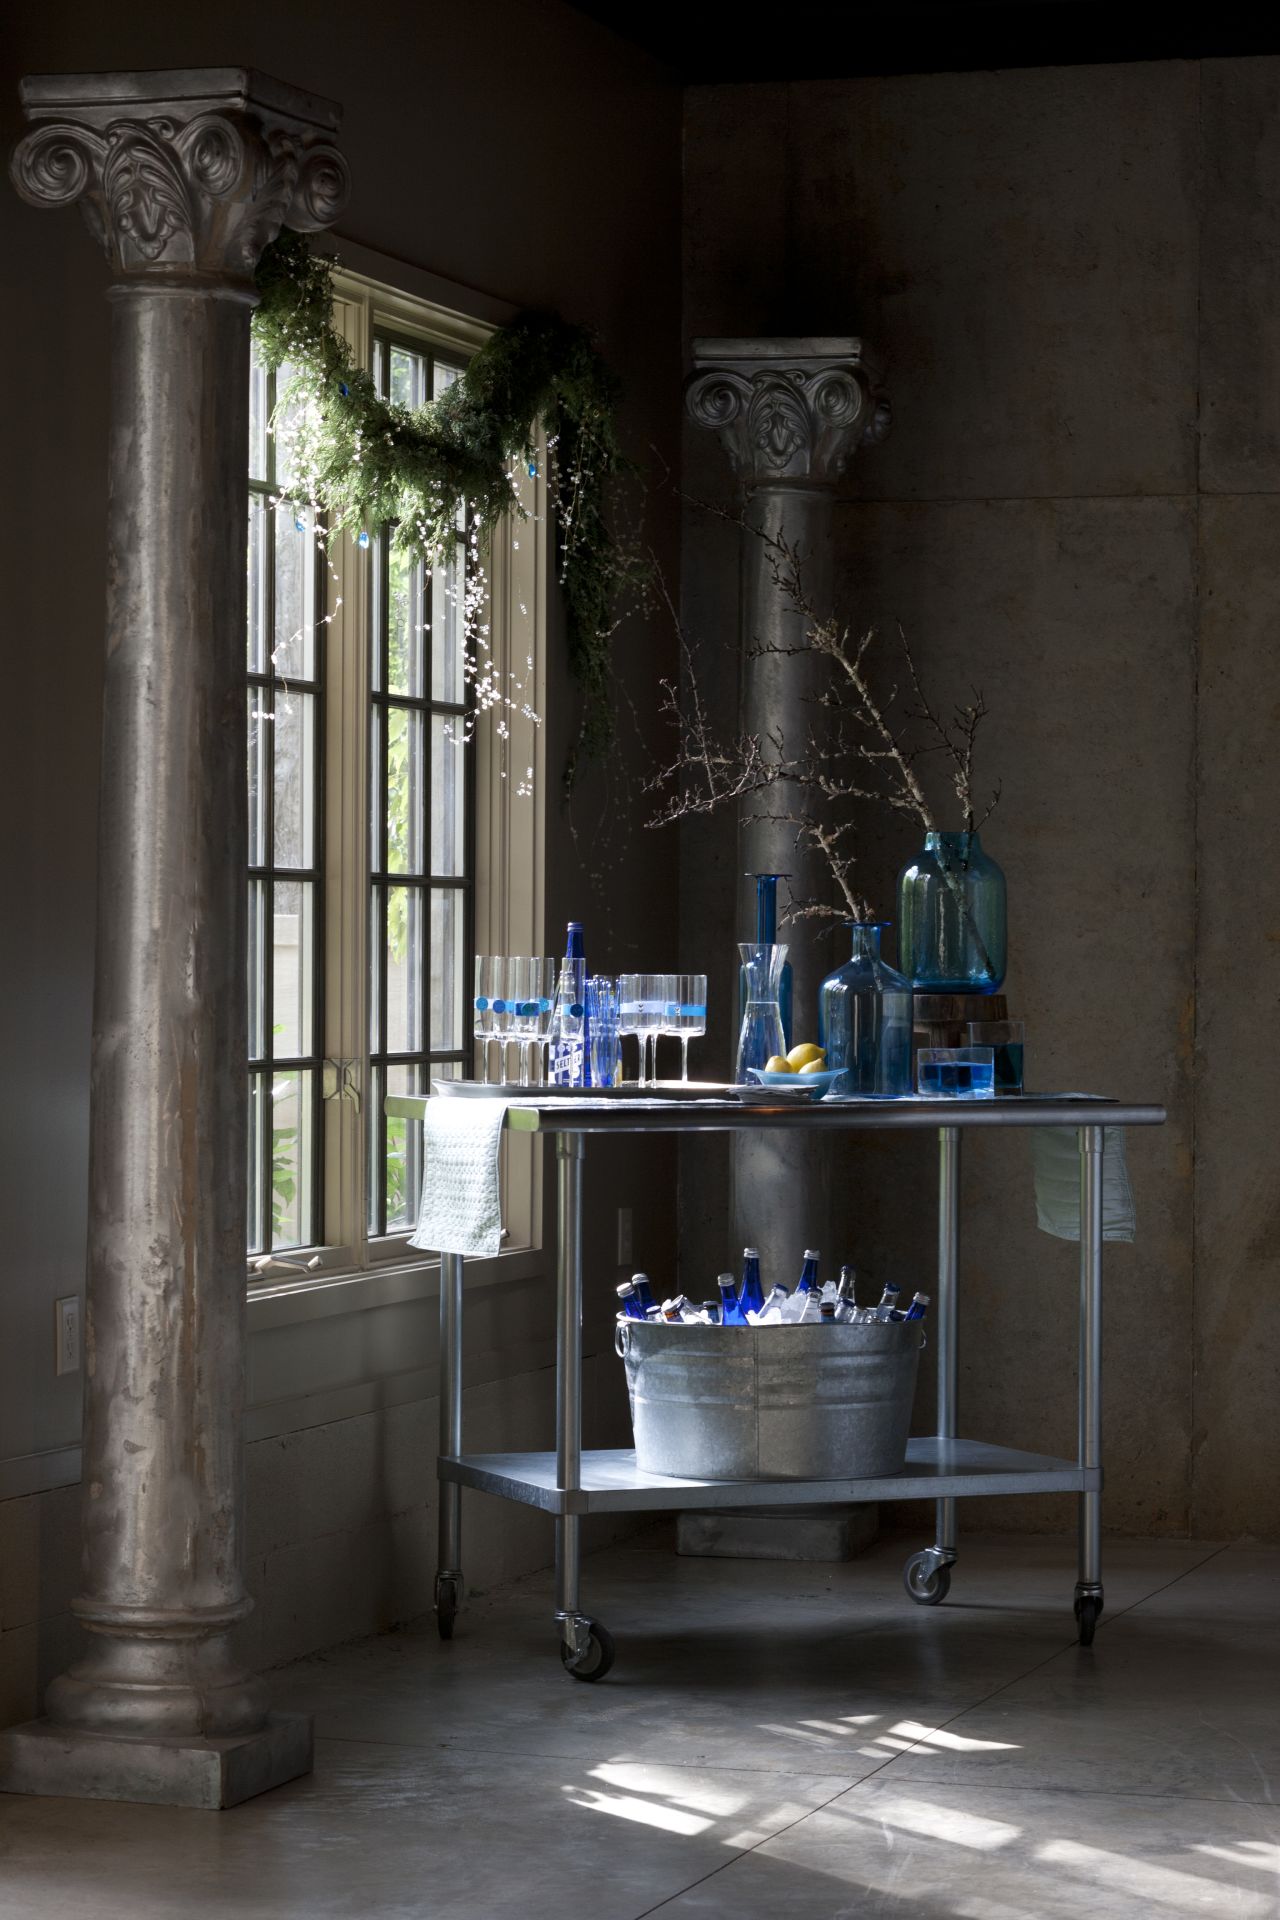 A sleek metal bar cart with blue glassware fits a modern or traditionally decorated space.